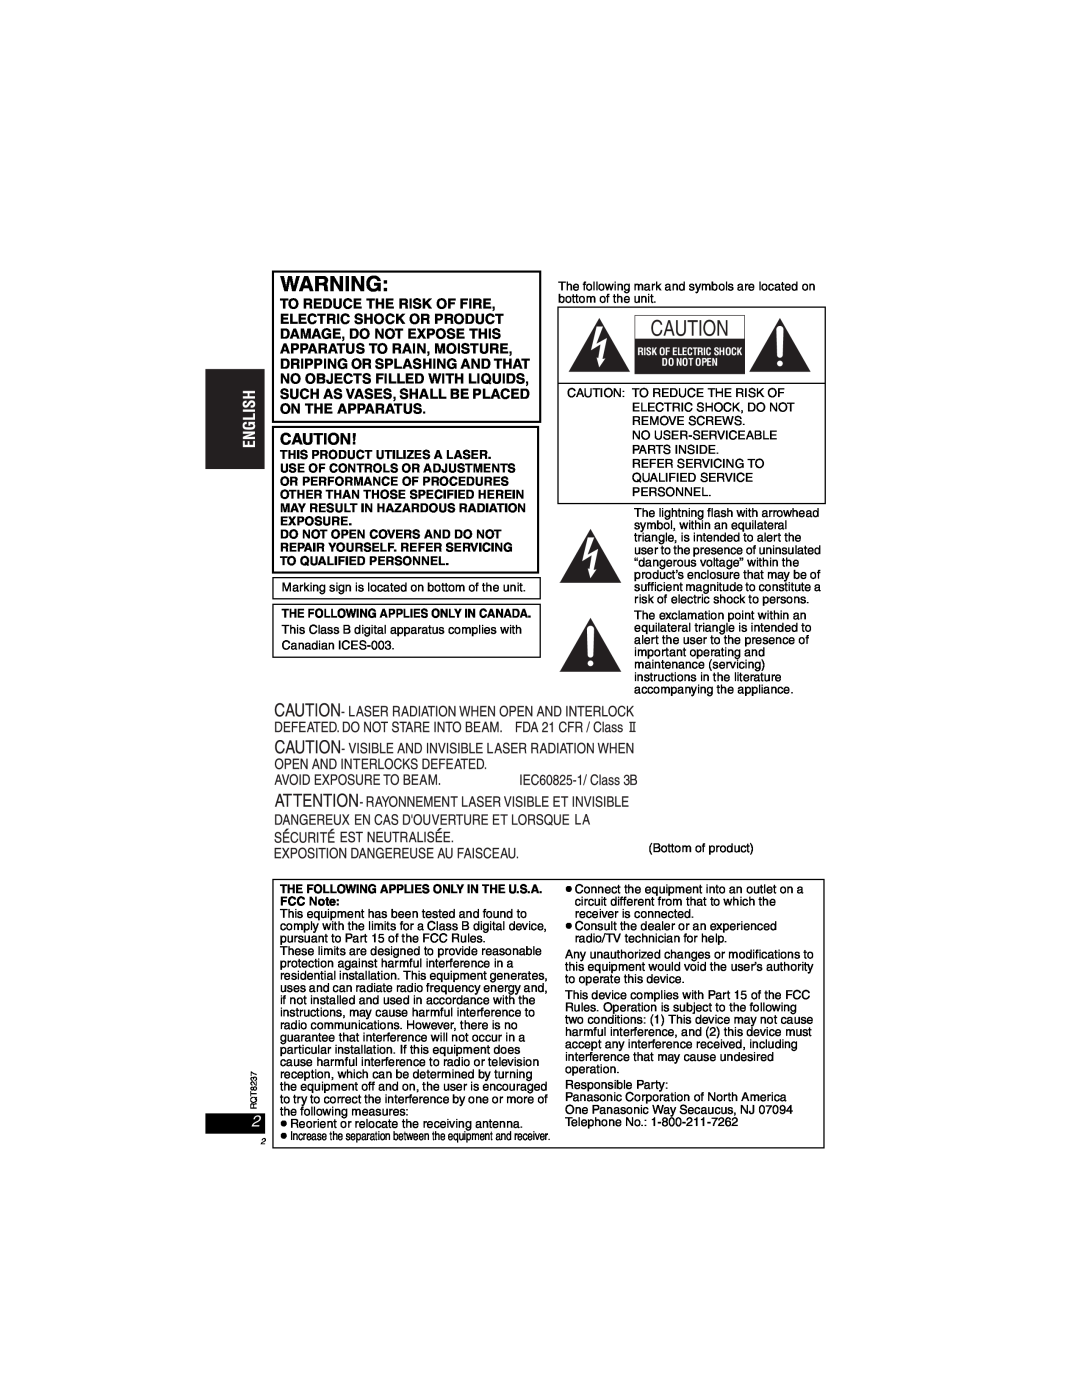 Panasonic DVD-LX97 The Following Applies Only In Canada, The Following Applies Only In The U.S.A, FCC Note 